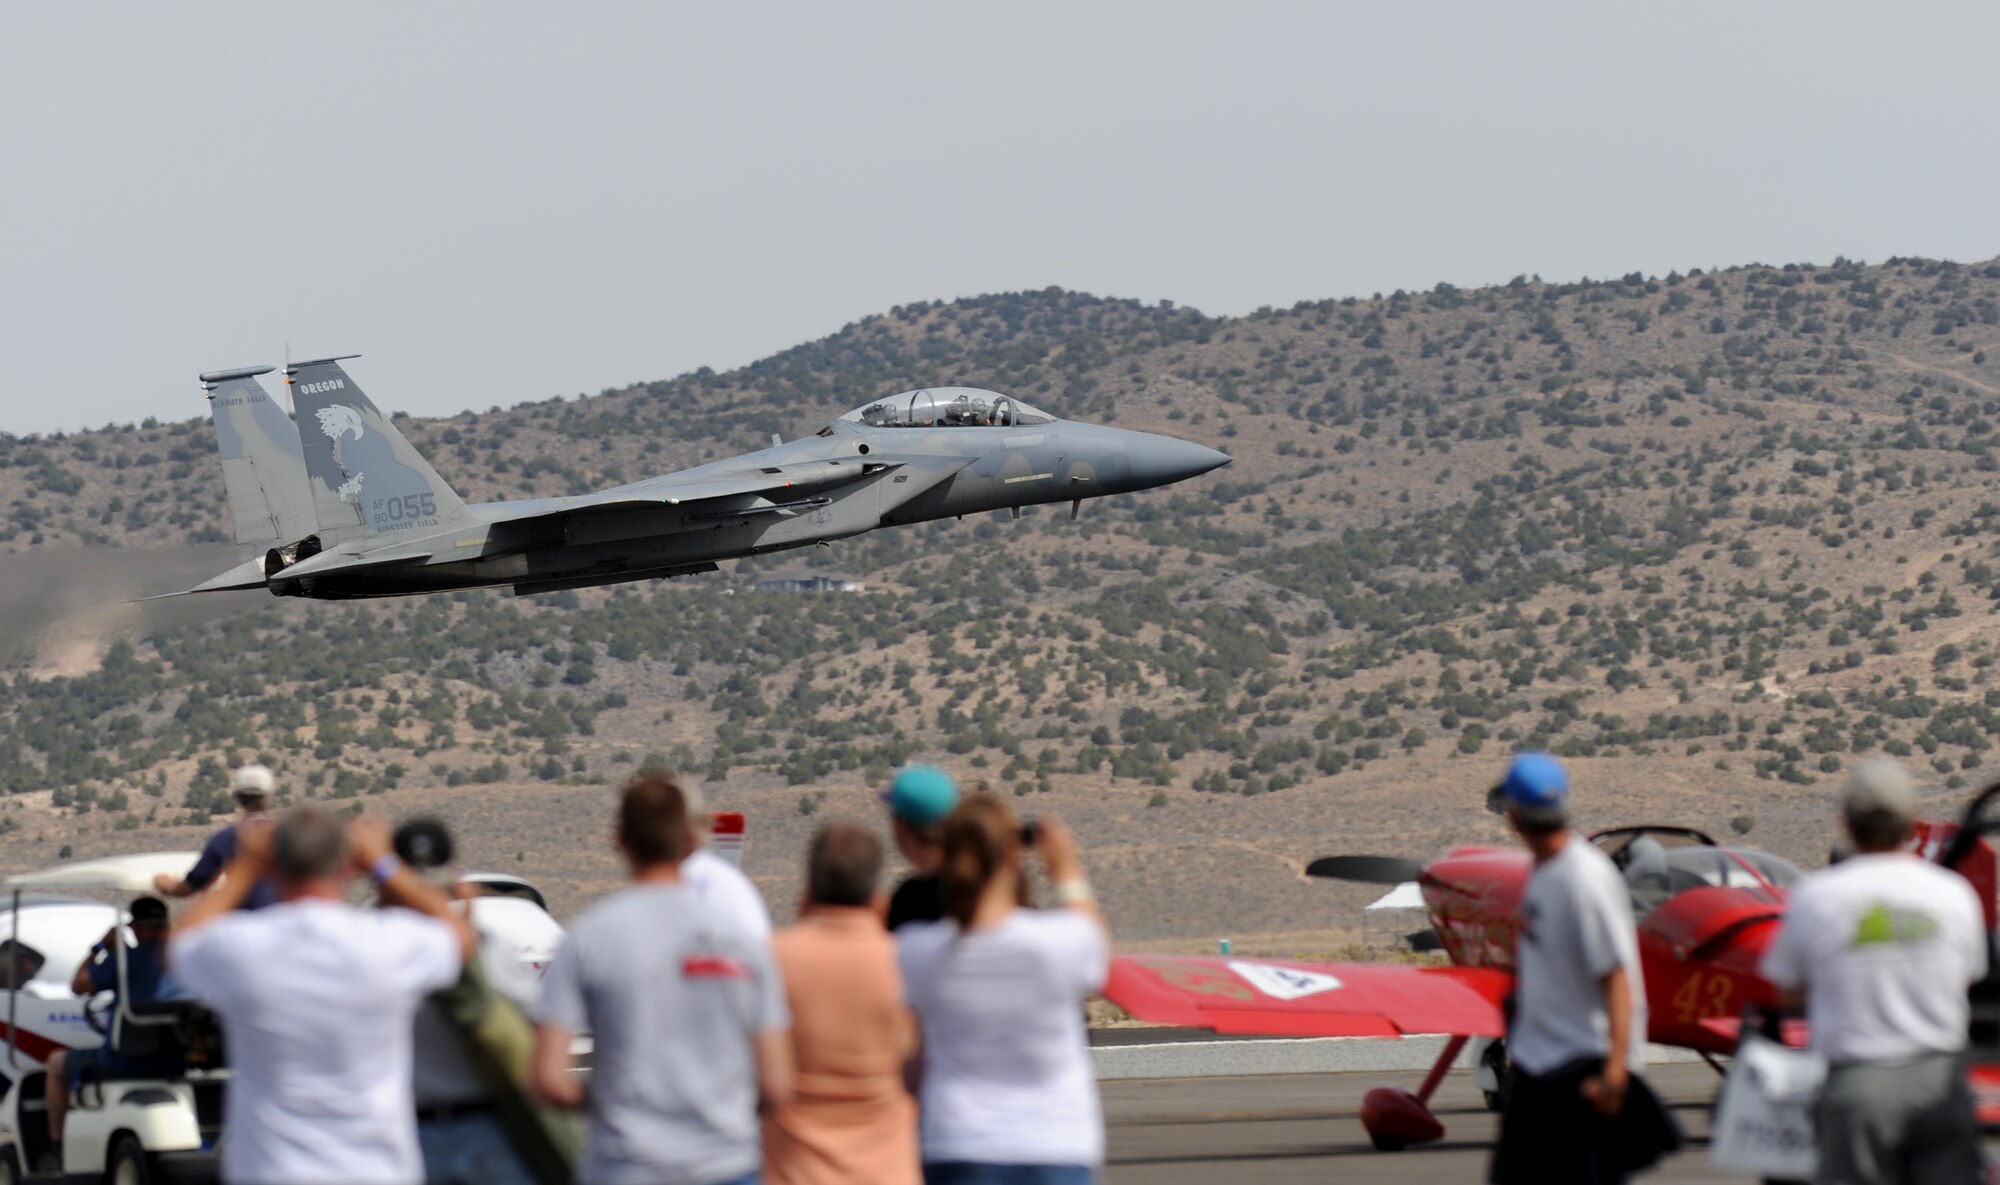 A U.S. Air Force F-15 Eagle fighter aircraft flies by a group of spectators during the National Championship Air Races at Stead Airport, Reno, Nev., Sept. 14, 2012. The aircraft is from the 114th Fighter Squadron, Oregon Air National Guard. (U.S. Air Force photo by Staff Sgt. Robert M. Trujillo/Released)